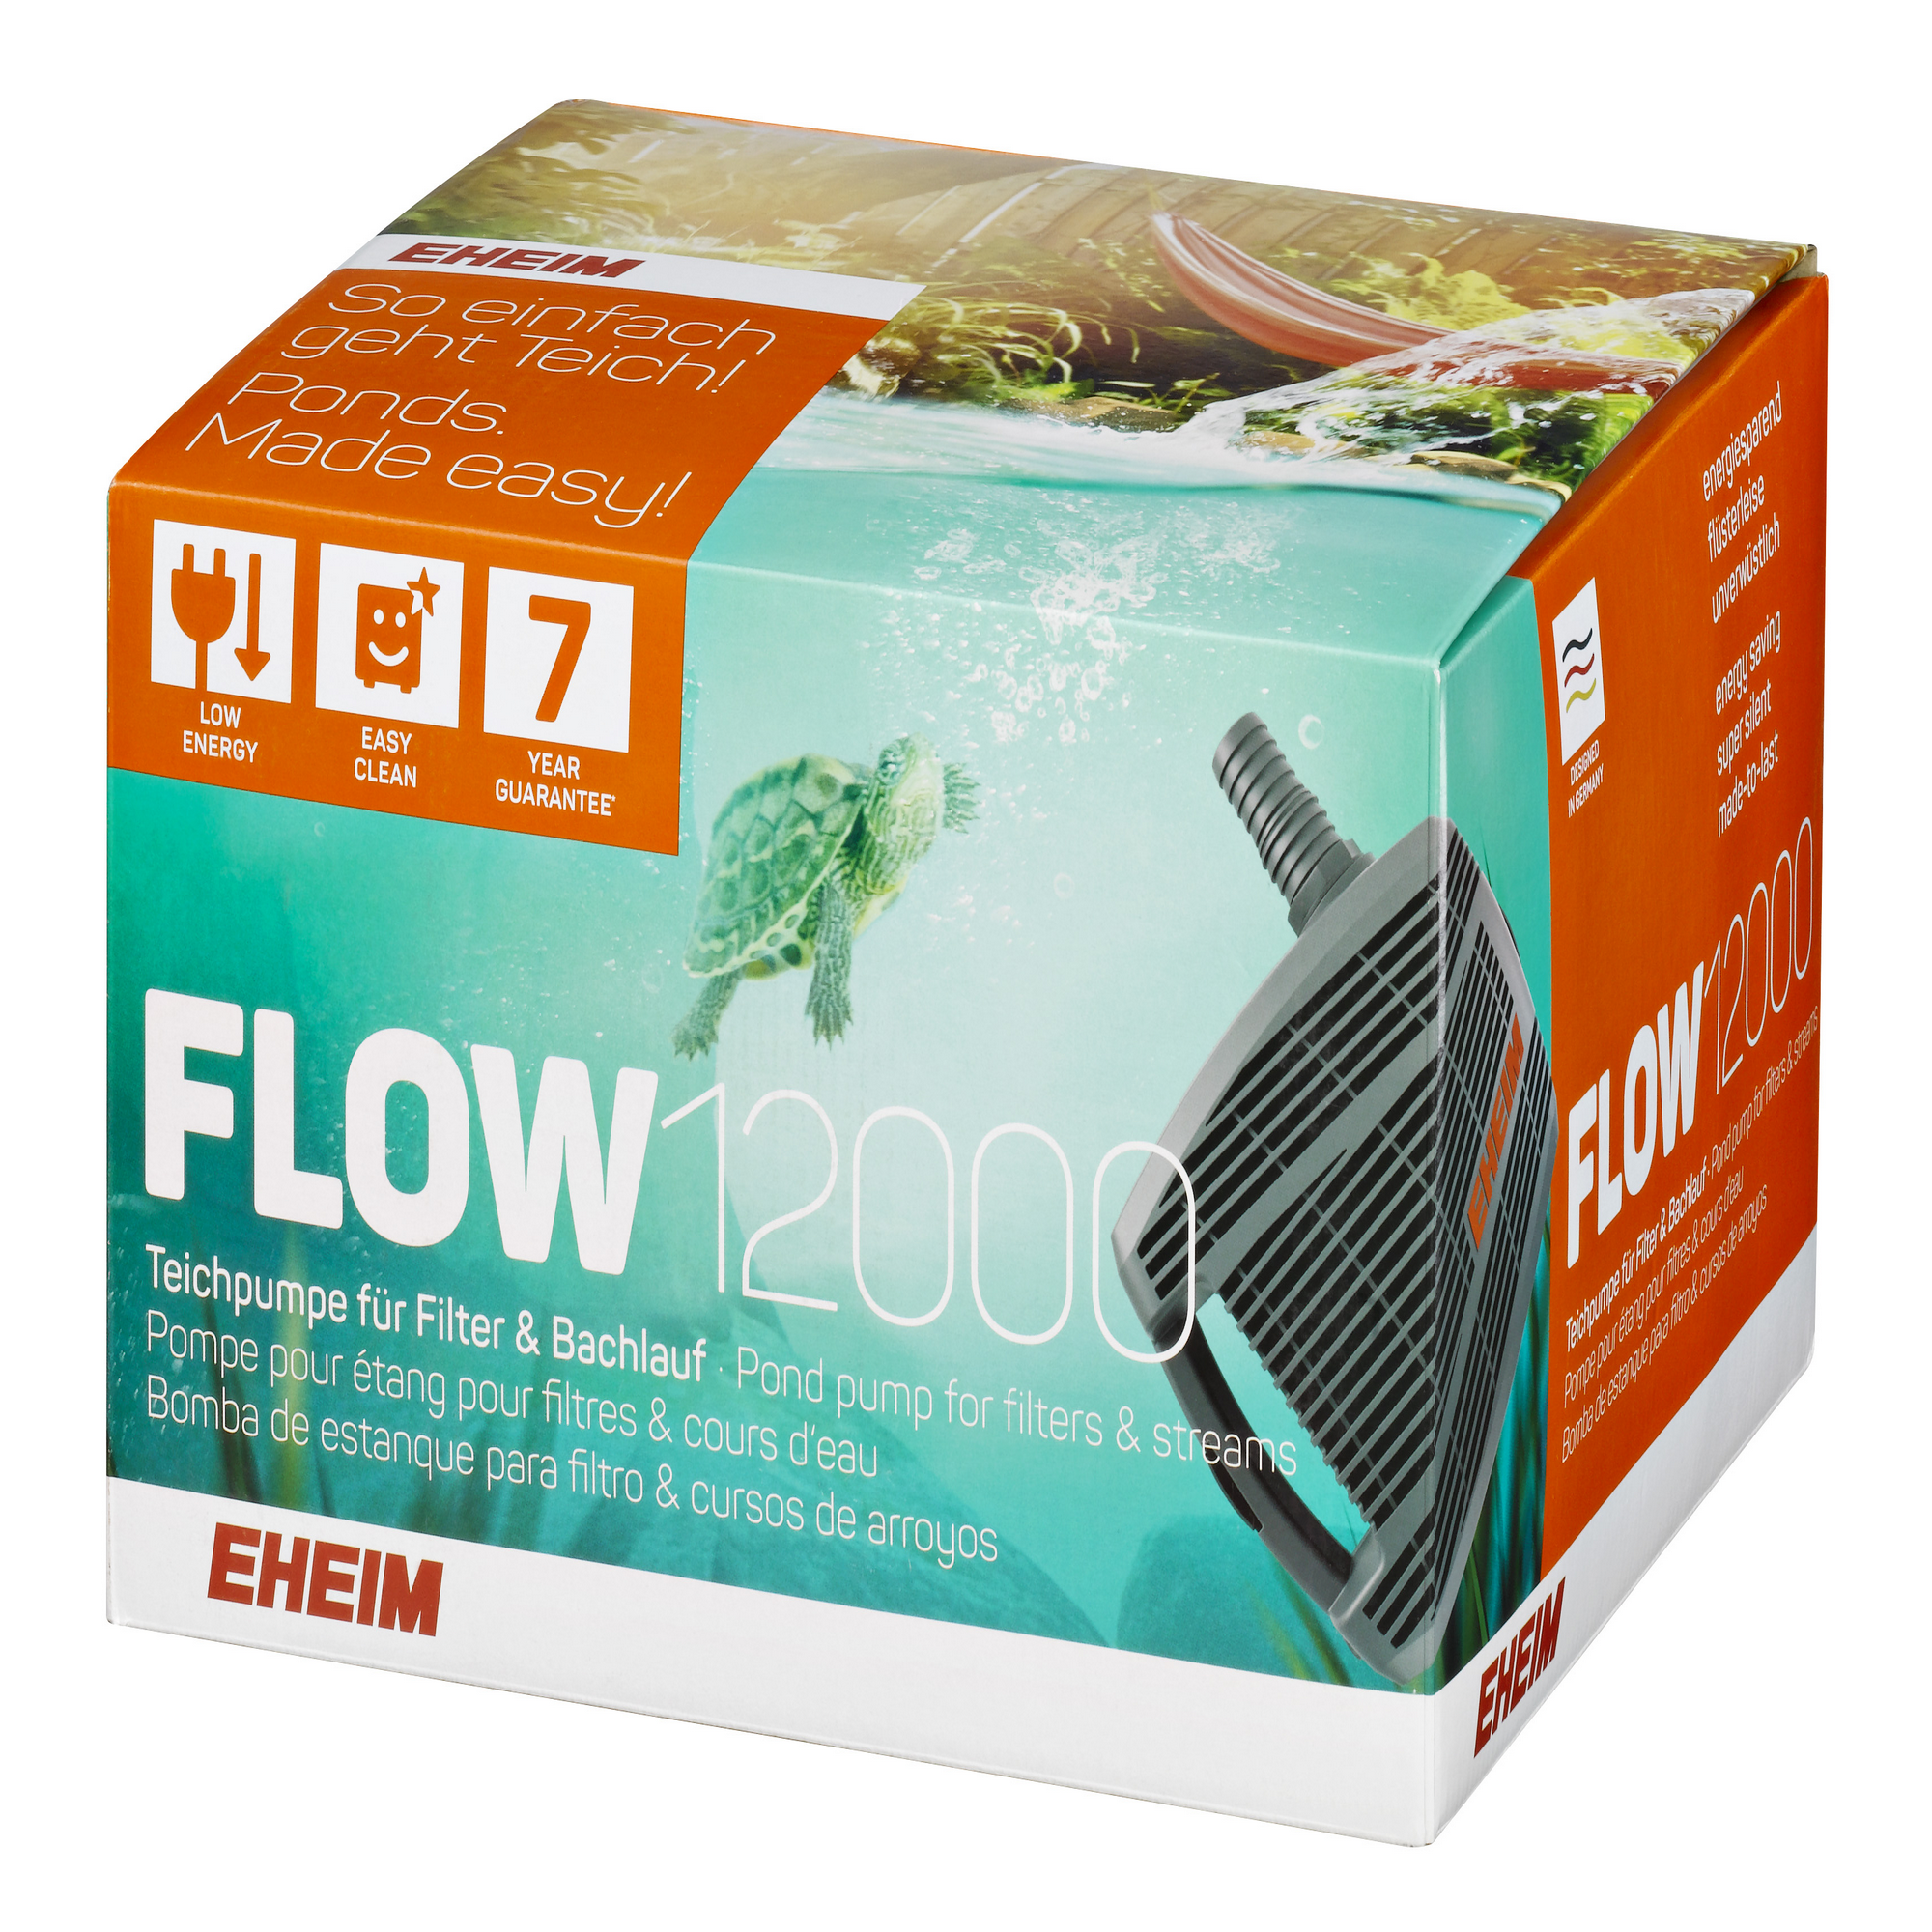 FLOW 12000 Teichpumpe + product picture